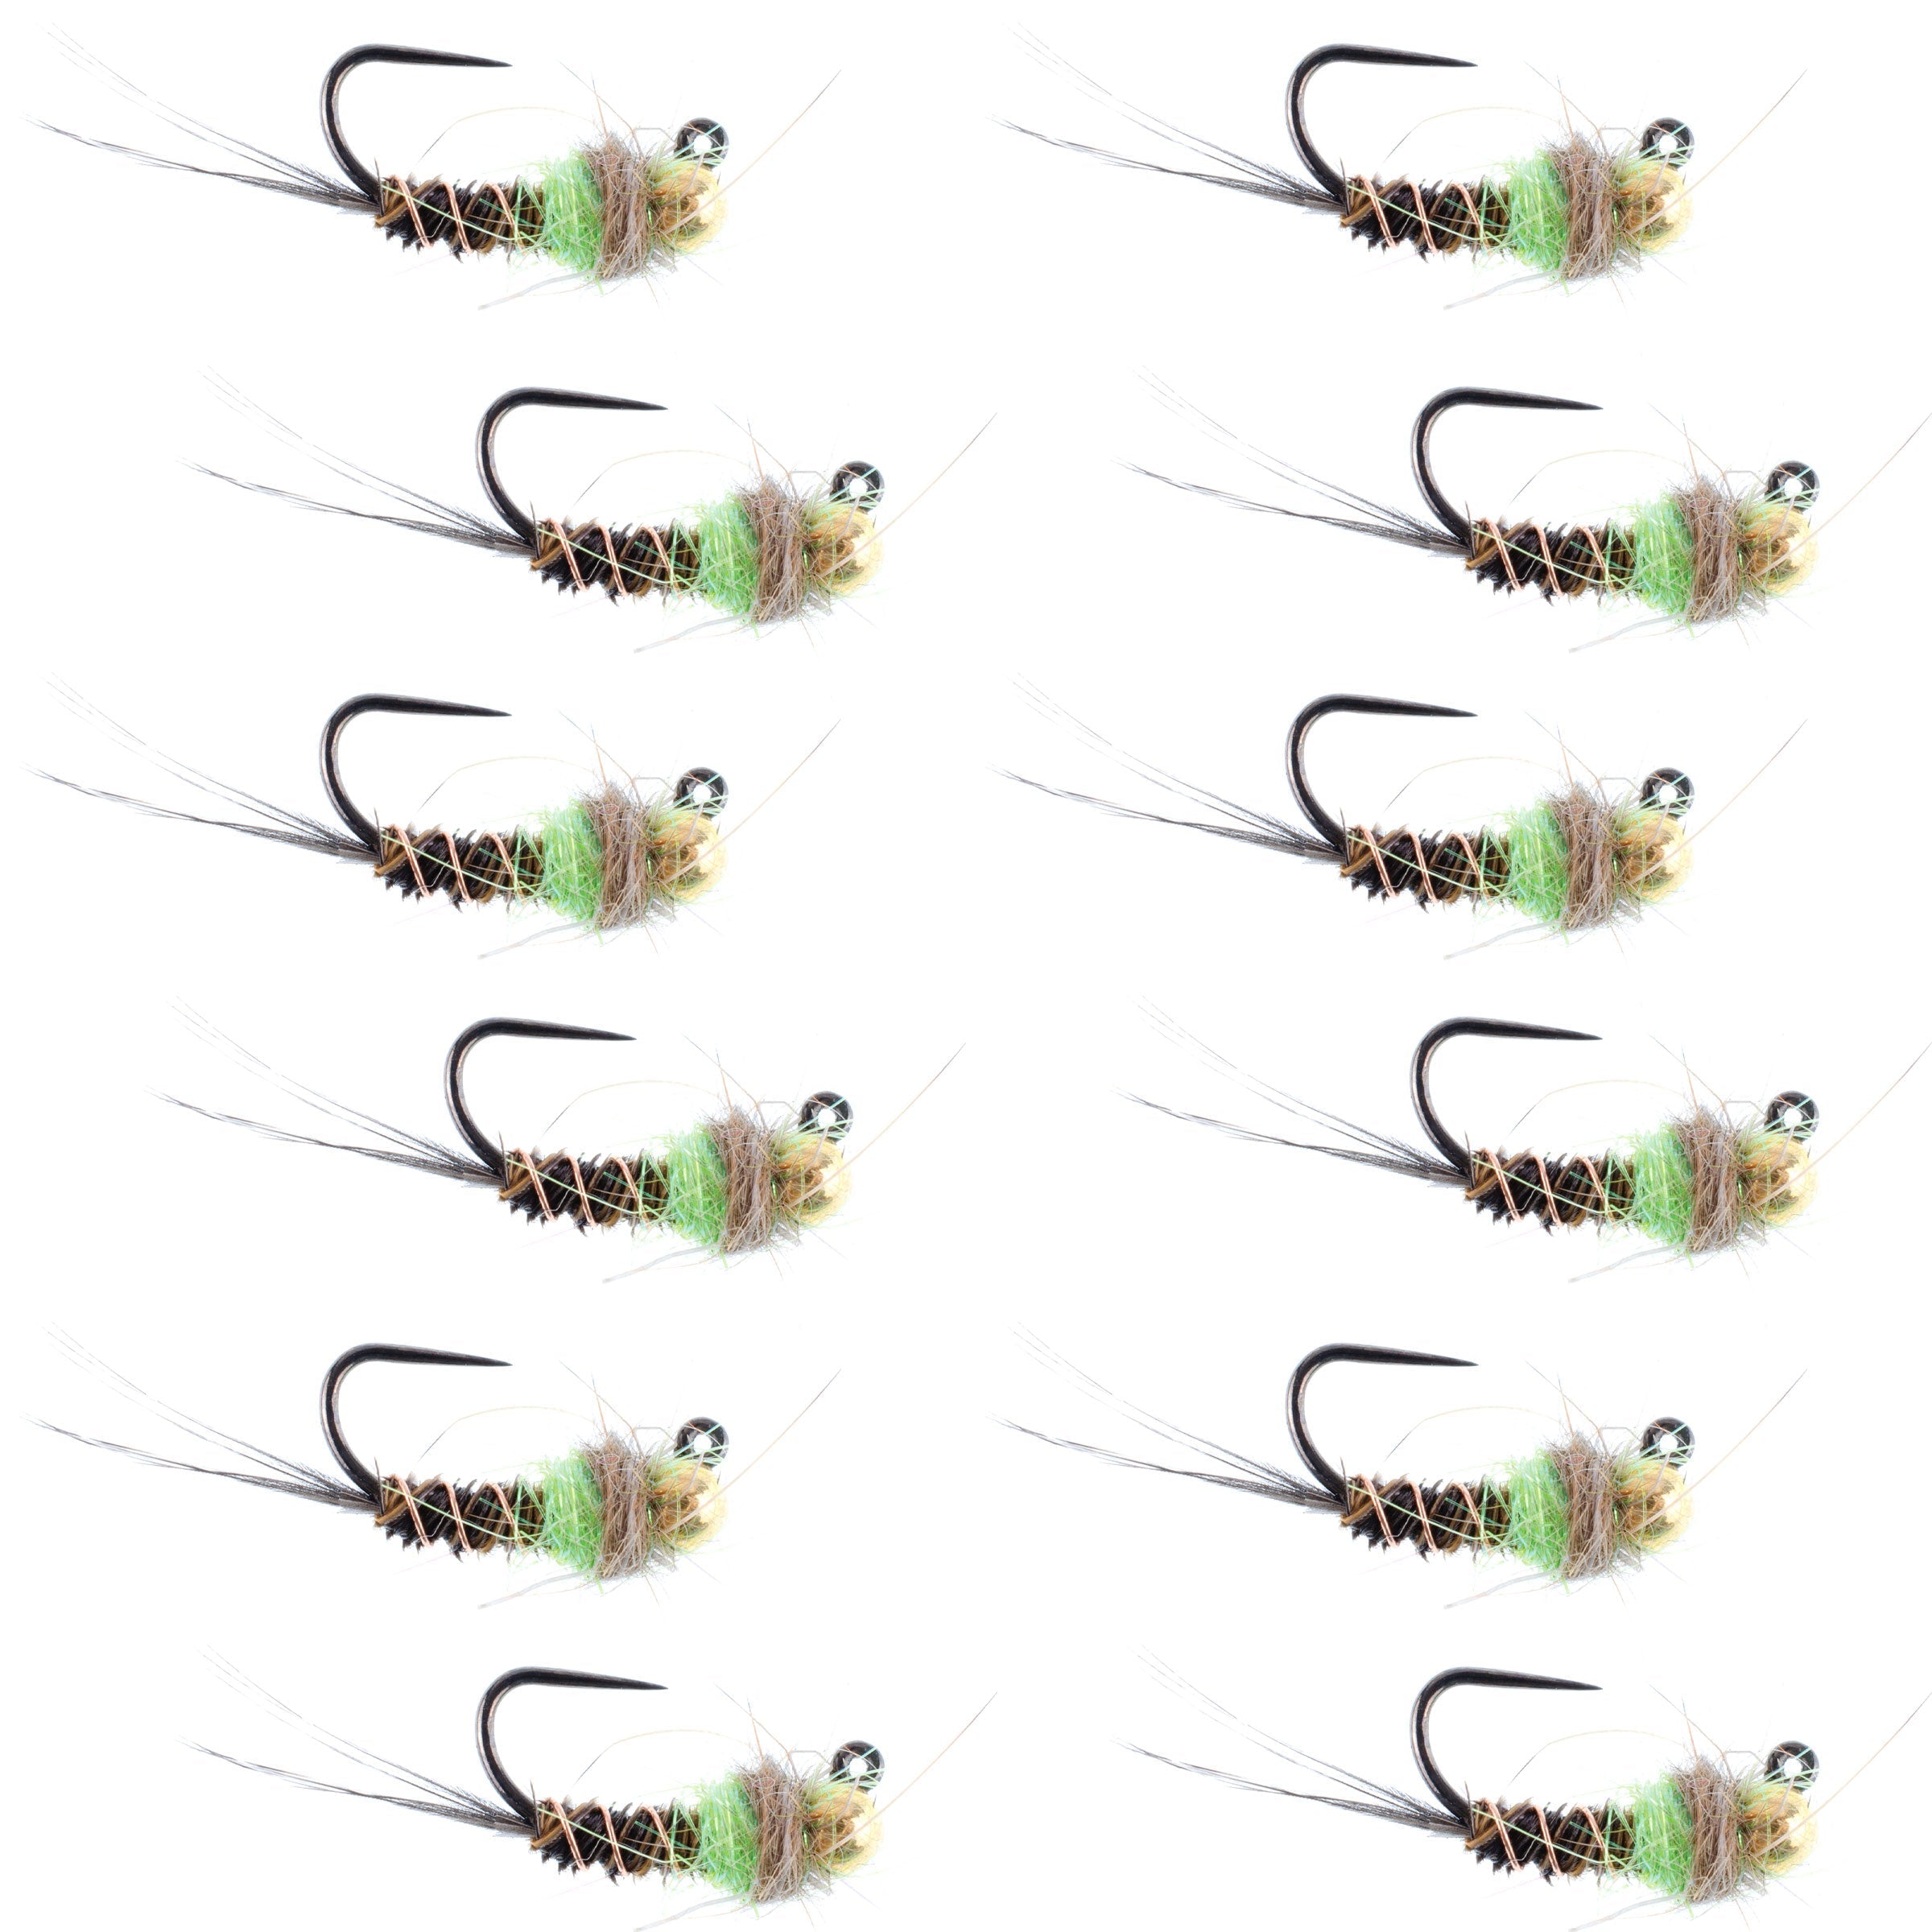 http://theflyfishingplace.com/cdn/shop/files/Tactical-Tungsten-Hot-Spot-Chartreuse-Pheasant-Tail-Nymph-Set-of-12-Fly-Fishing-Flies_727cad61-e2b2-4af4-b7ad-0772d4eefdcd.jpg?v=1705167540